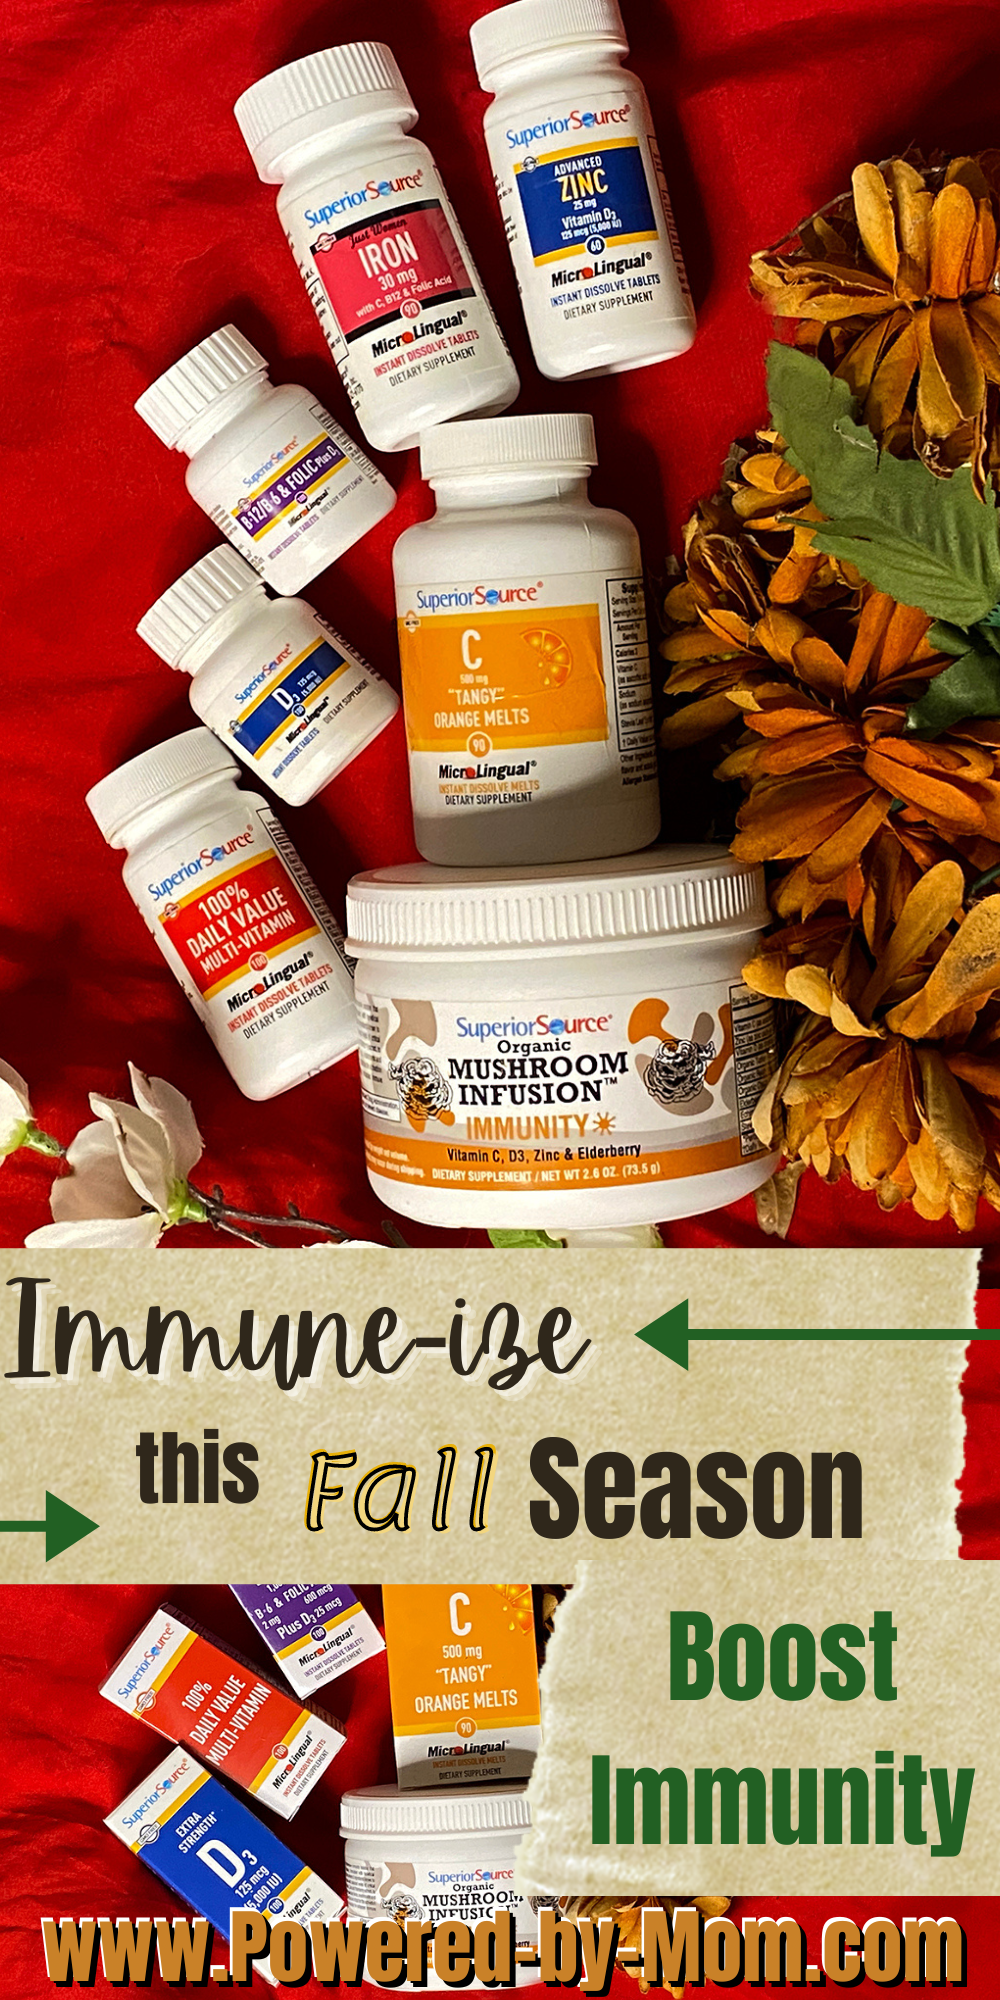 Get ready to immune-ize this fall with supplements that actually get used by your body through the patented MicroLingual® system.